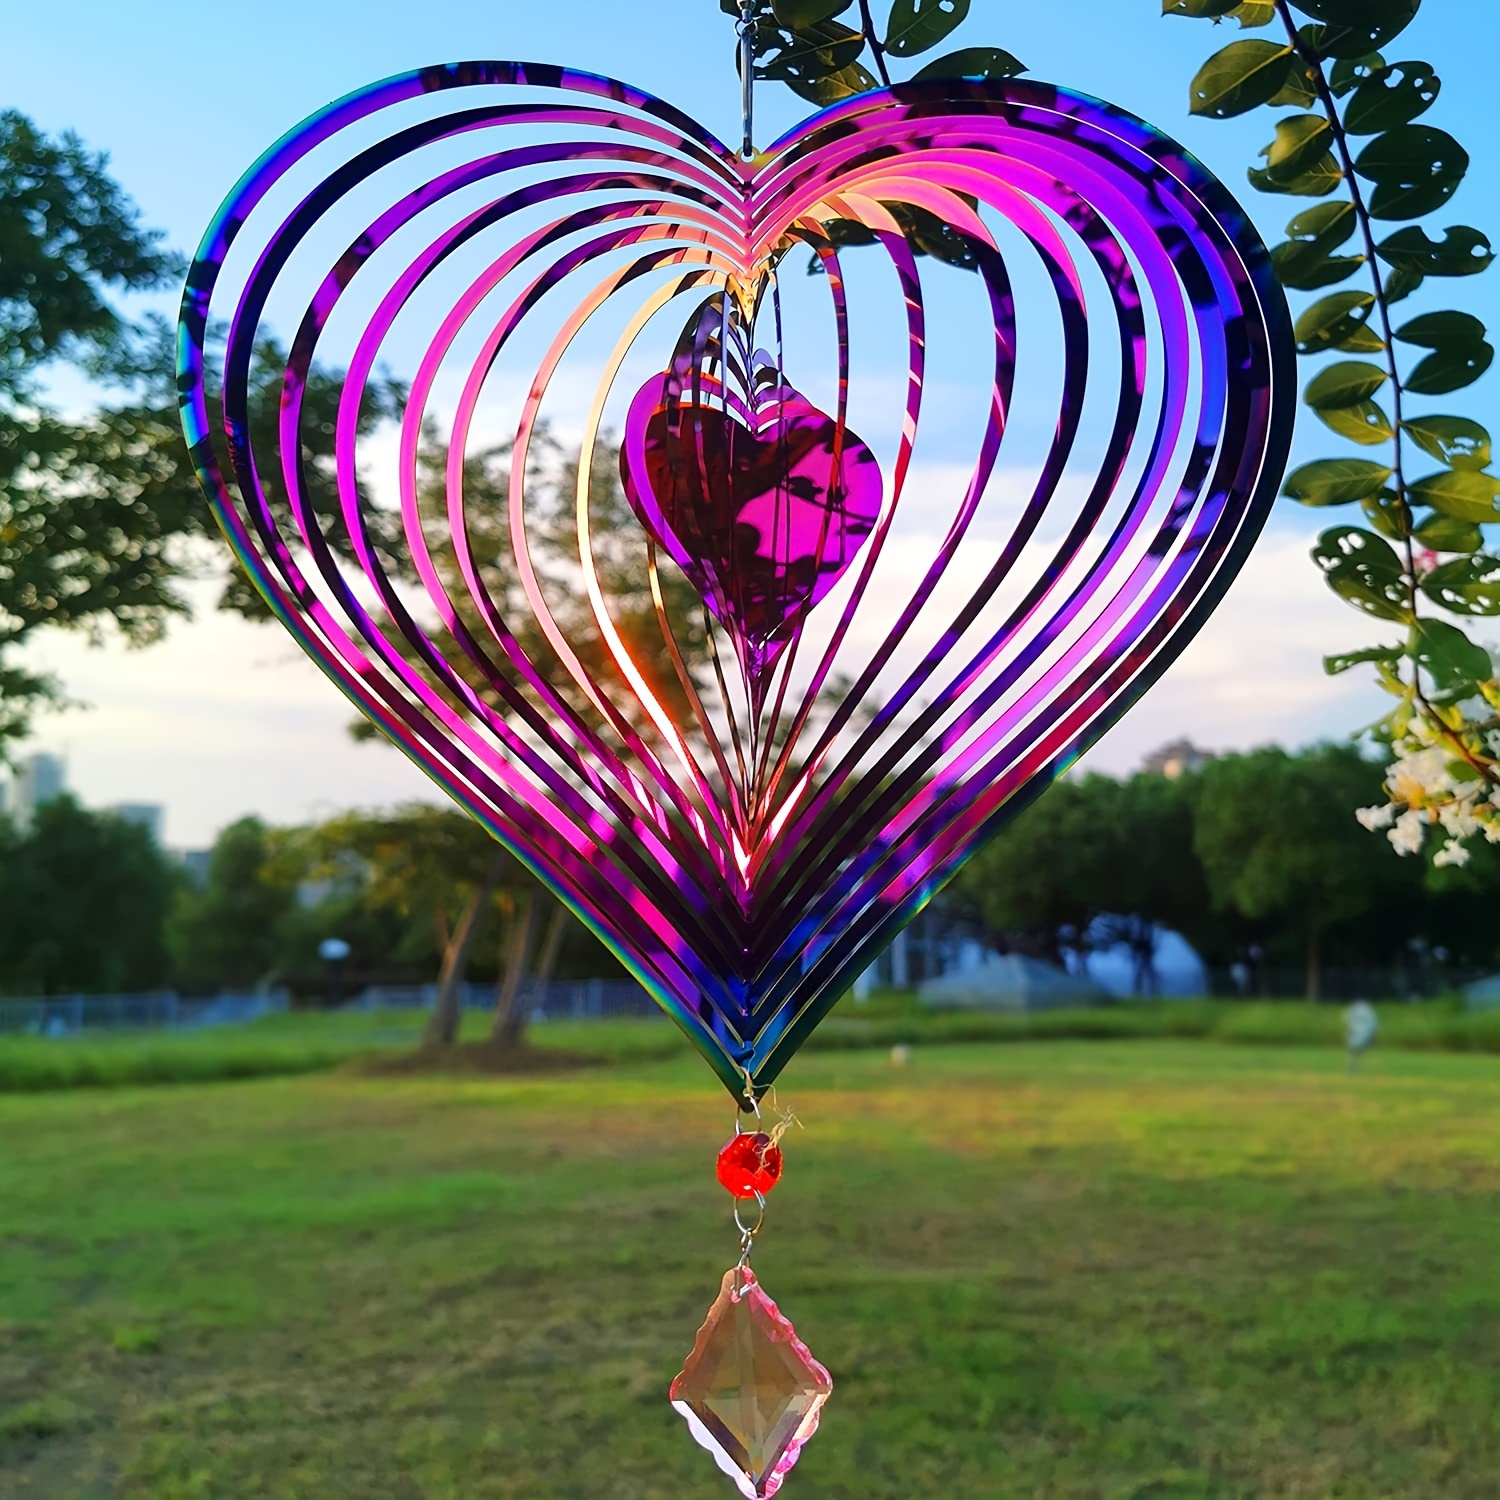 

Stainless Steel Heart-shaped Wind Spinner - 3d Metal Outdoor Garden Decor, No Battery Needed, Perfect For Yard & Patio